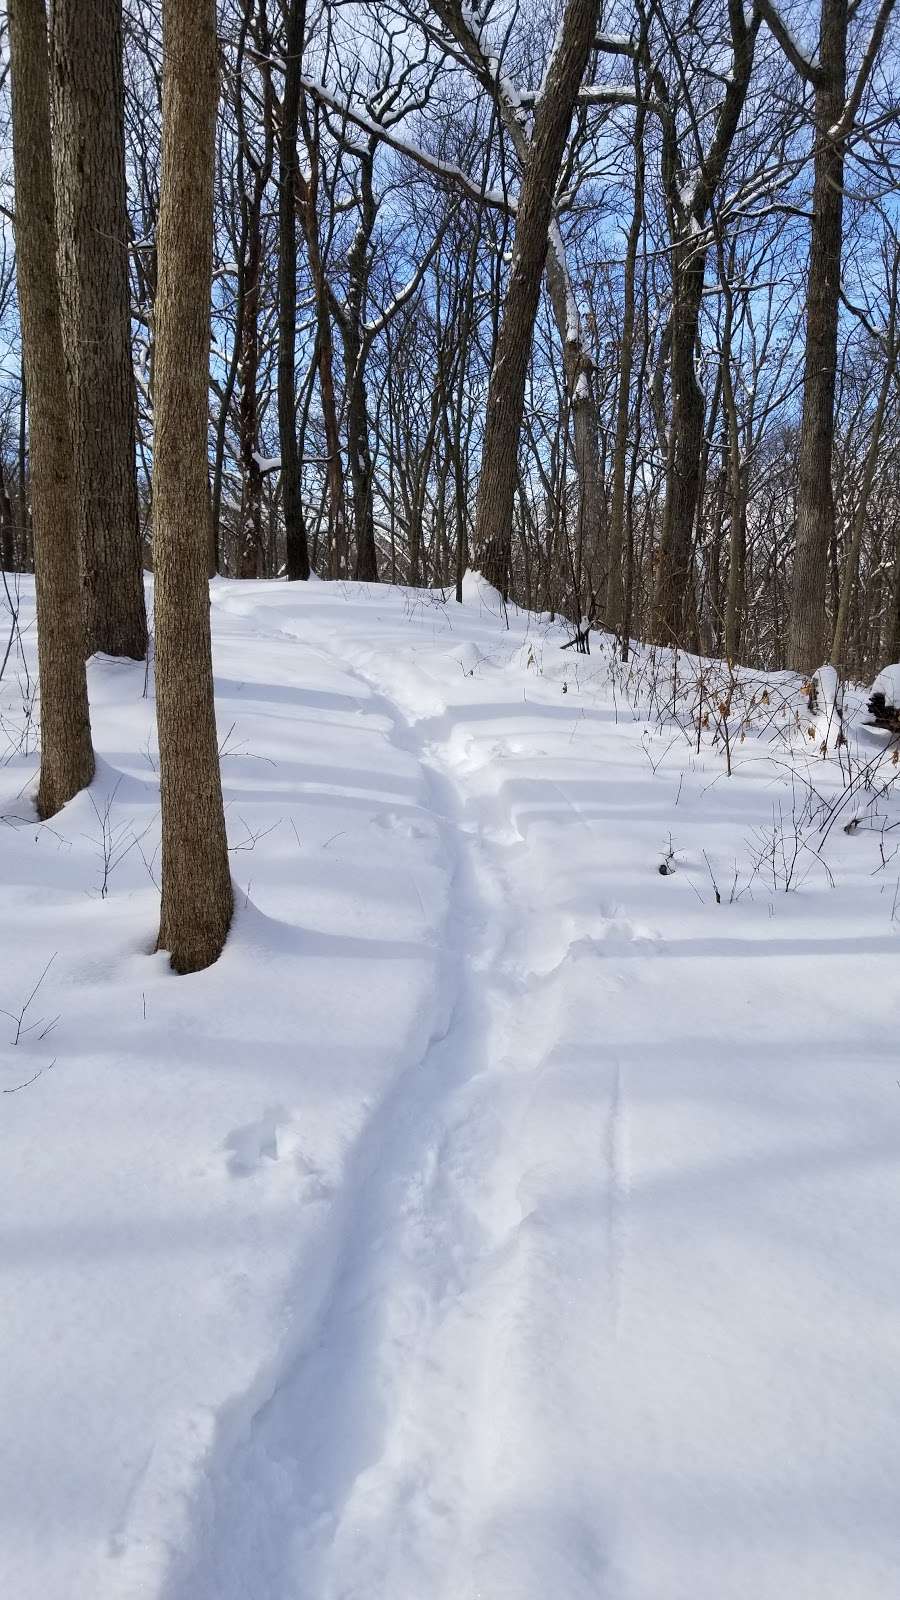 Ice Age Trail Parking Out To Rice Lake | 7206 US-12, Whitewater, WI 53190